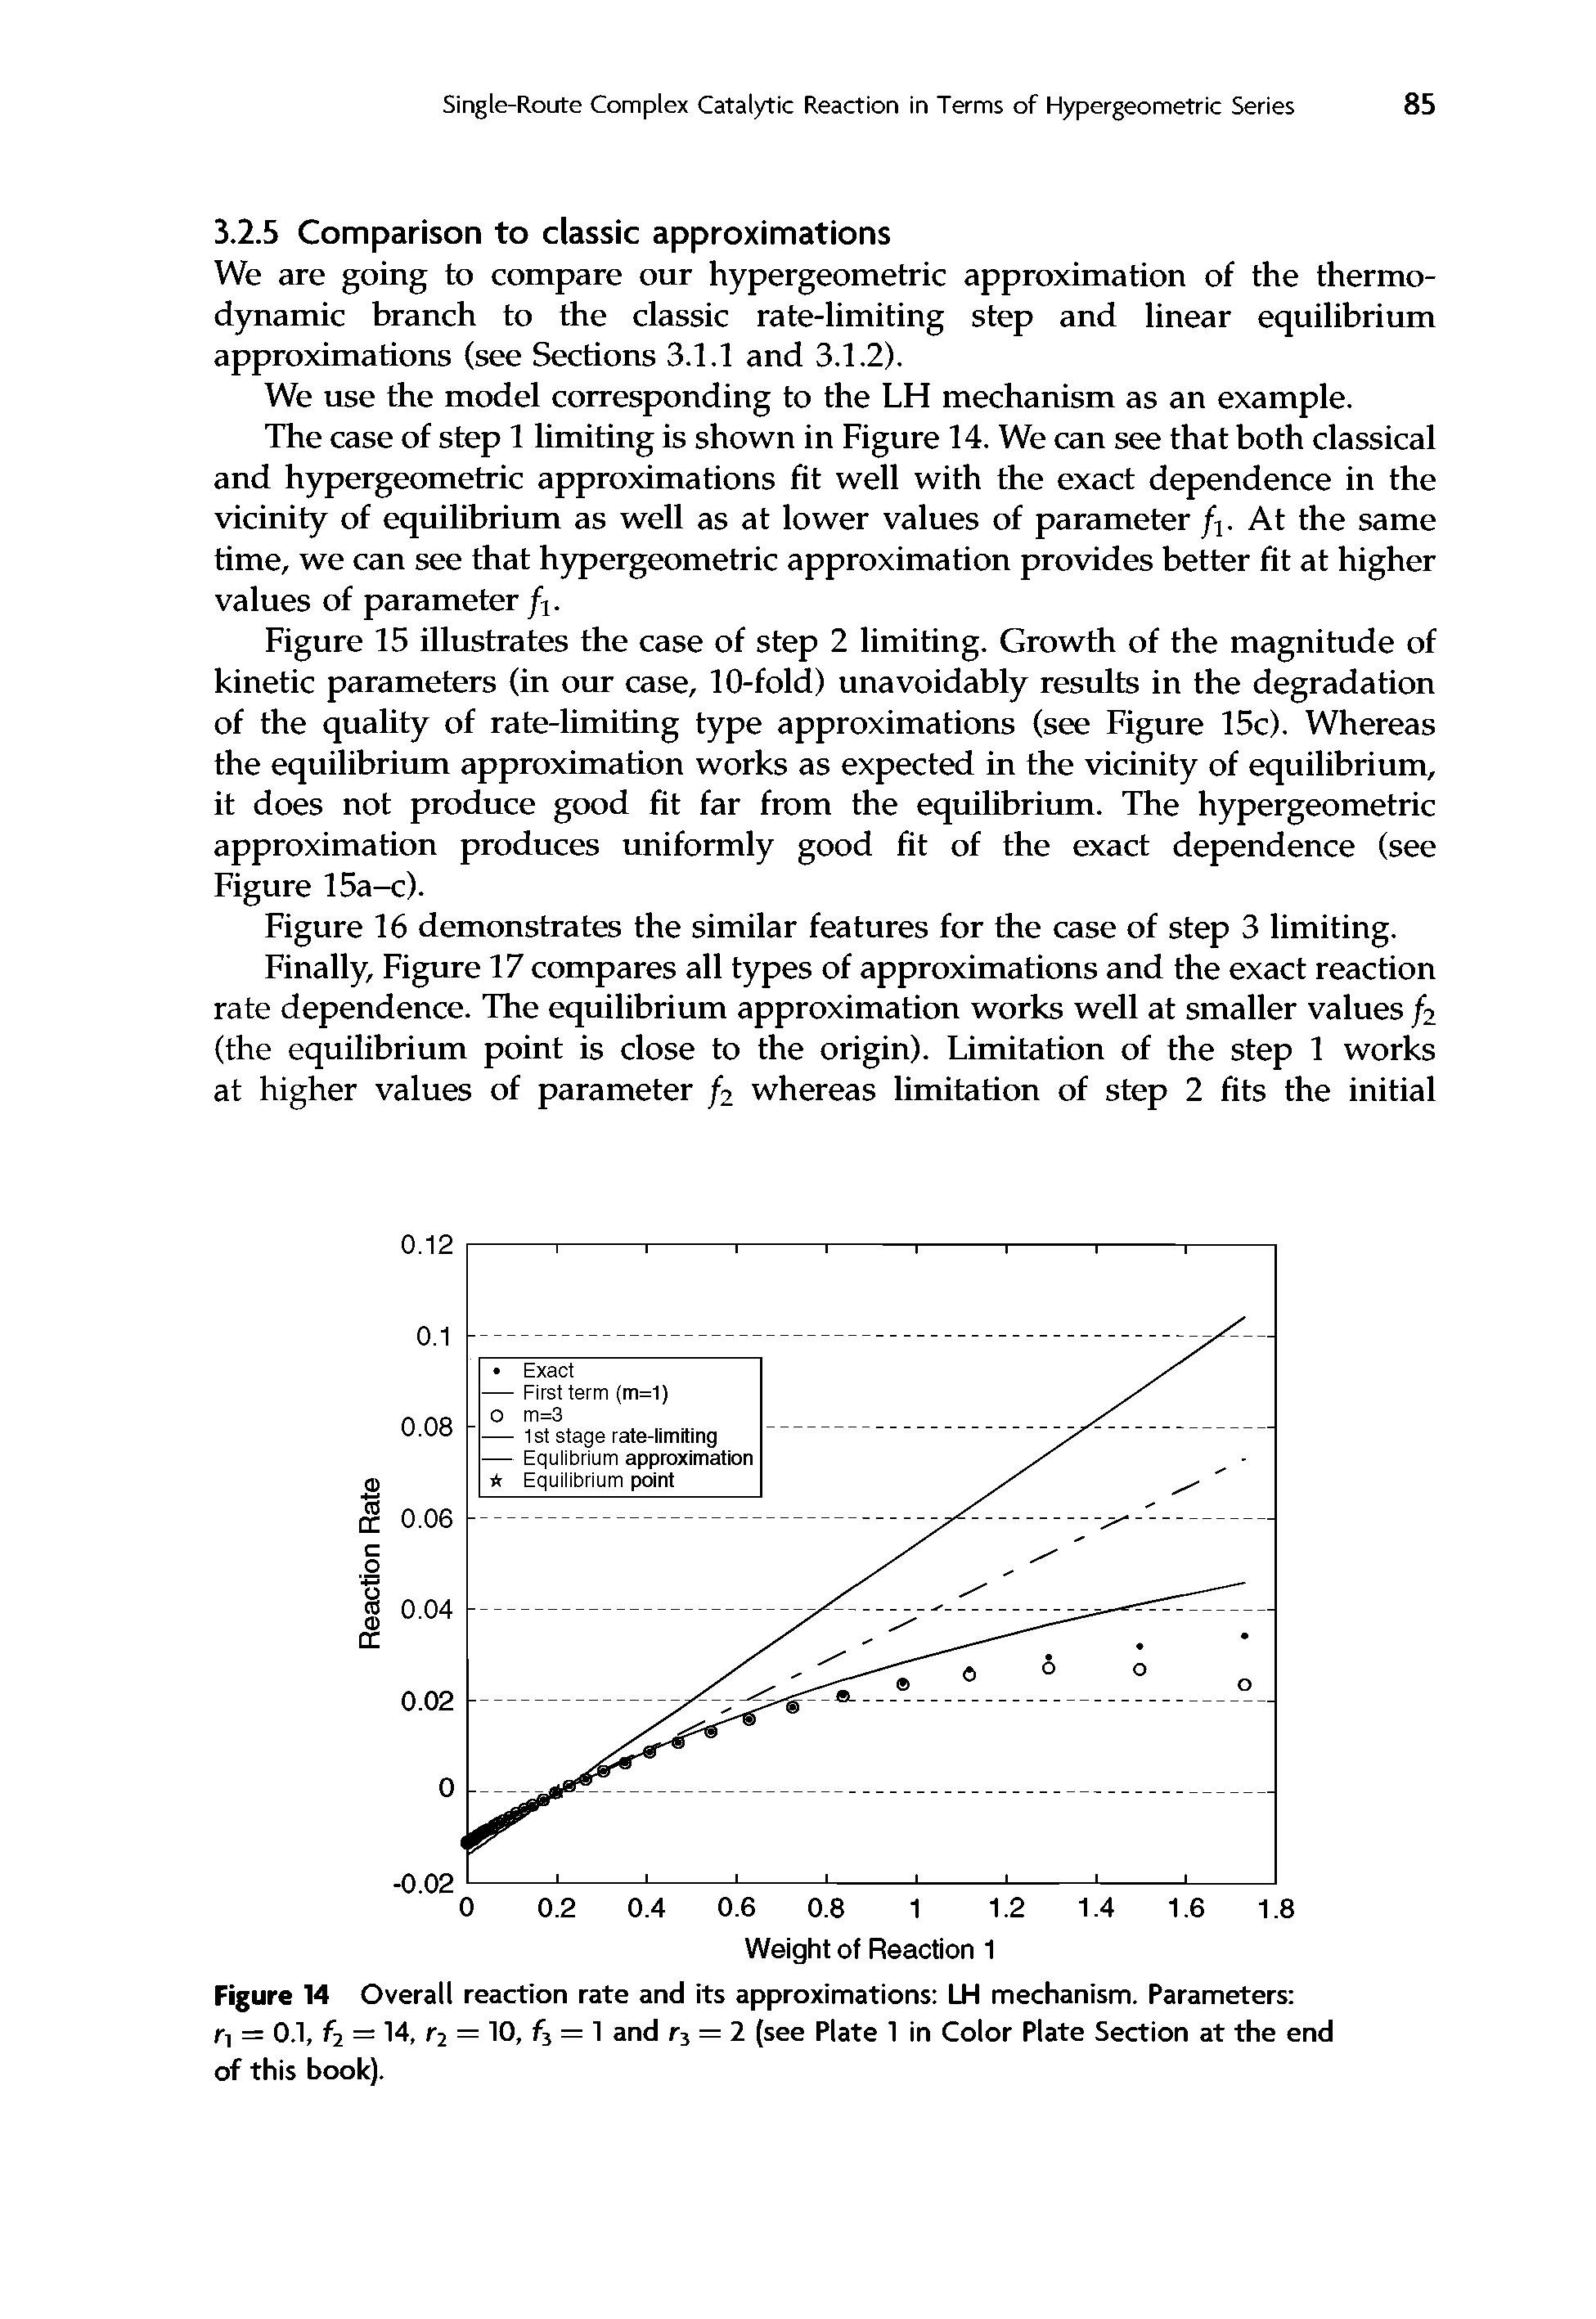 Figure 15 illustrates the case of step 2 limiting. Growth of the magnitude of kinetic parameters (in our case, 10-fold) unavoidably results in the degradation of the quality of rate-limiting type approximations (see Figure 15c). Whereas the equilibrium approximation works as expected in the vicinity of equilibrium, it does not produce good fit far from the equilibrium. The hypergeometric approximation produces uniformly good fit of the exact dependence (see Figure 15a-c).